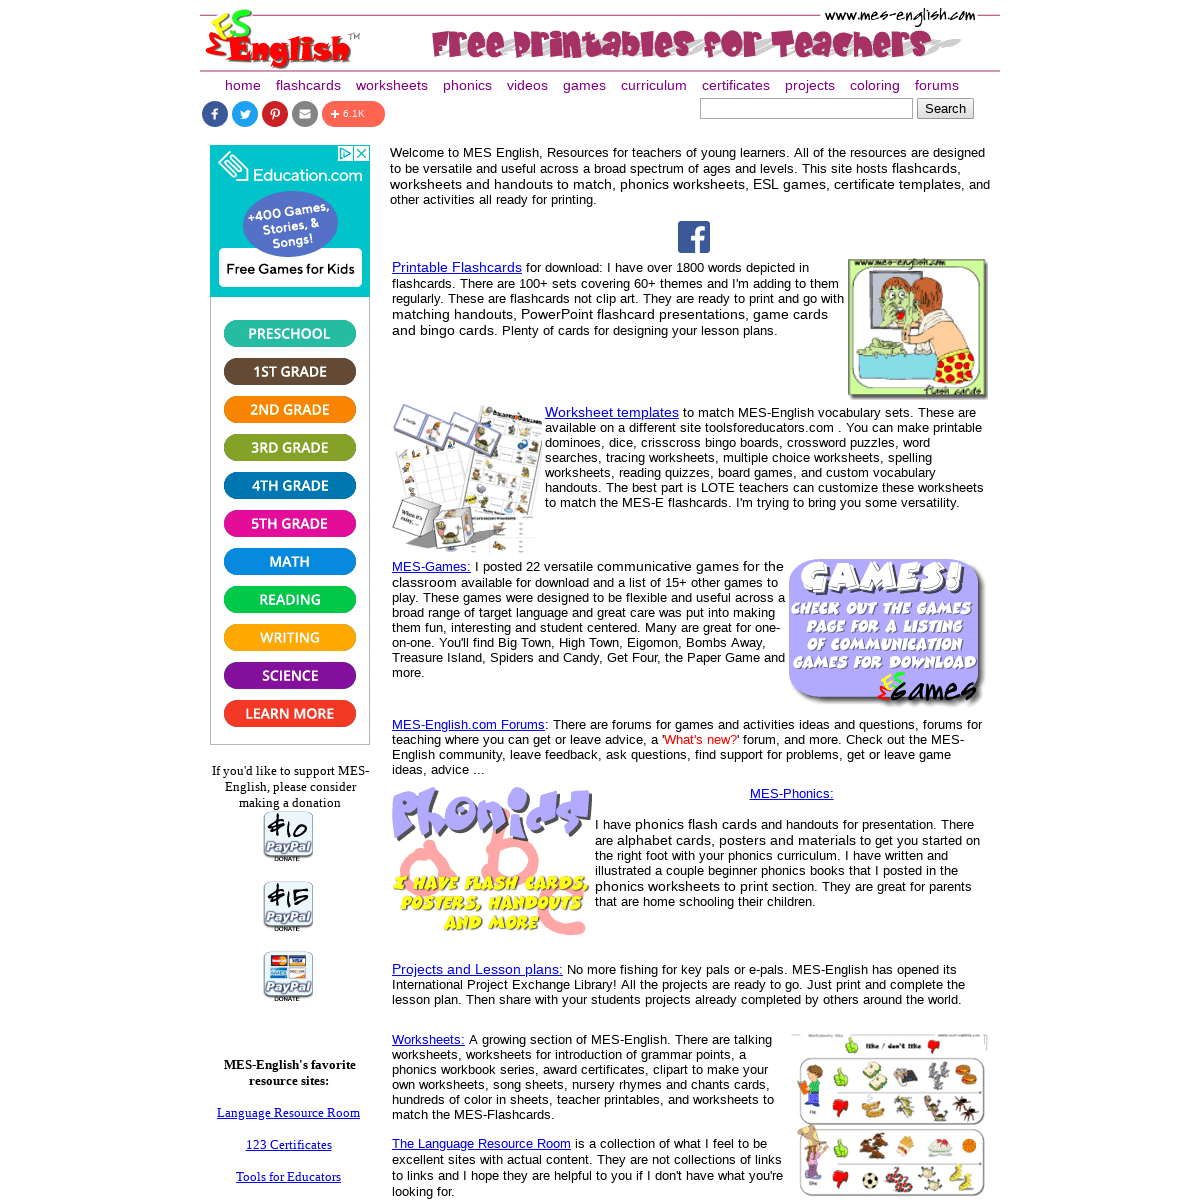 mes-english-shapes-and-colors-flashcards-worksheets-game-cards-handouts-and-other